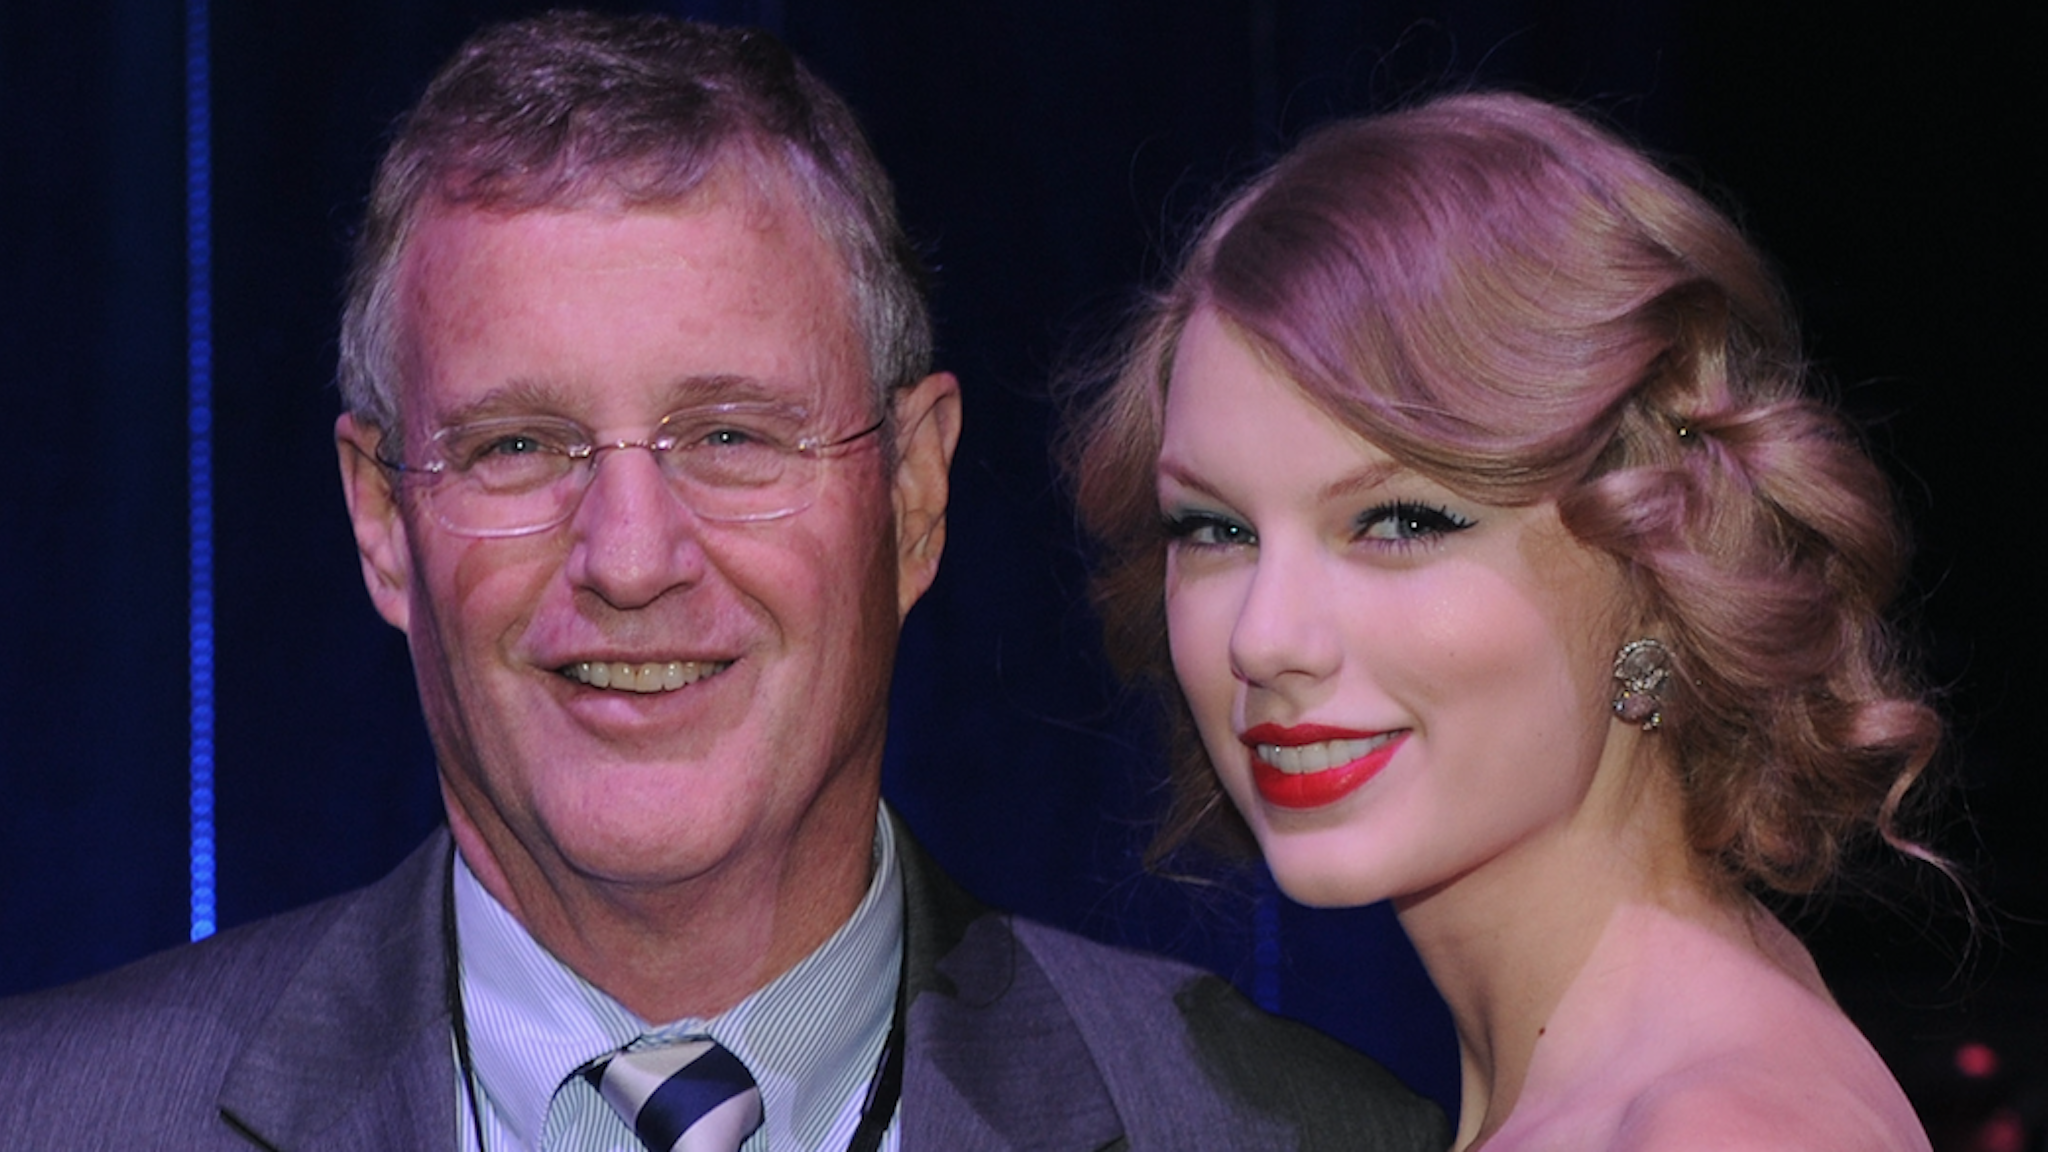 Scott Swift and Honoree/Daughter Taylor Swift at the 2011 CMT Artists of the year celebration at the Bridgestone Arena on November 29, 2011 in Nashville, Tennessee.